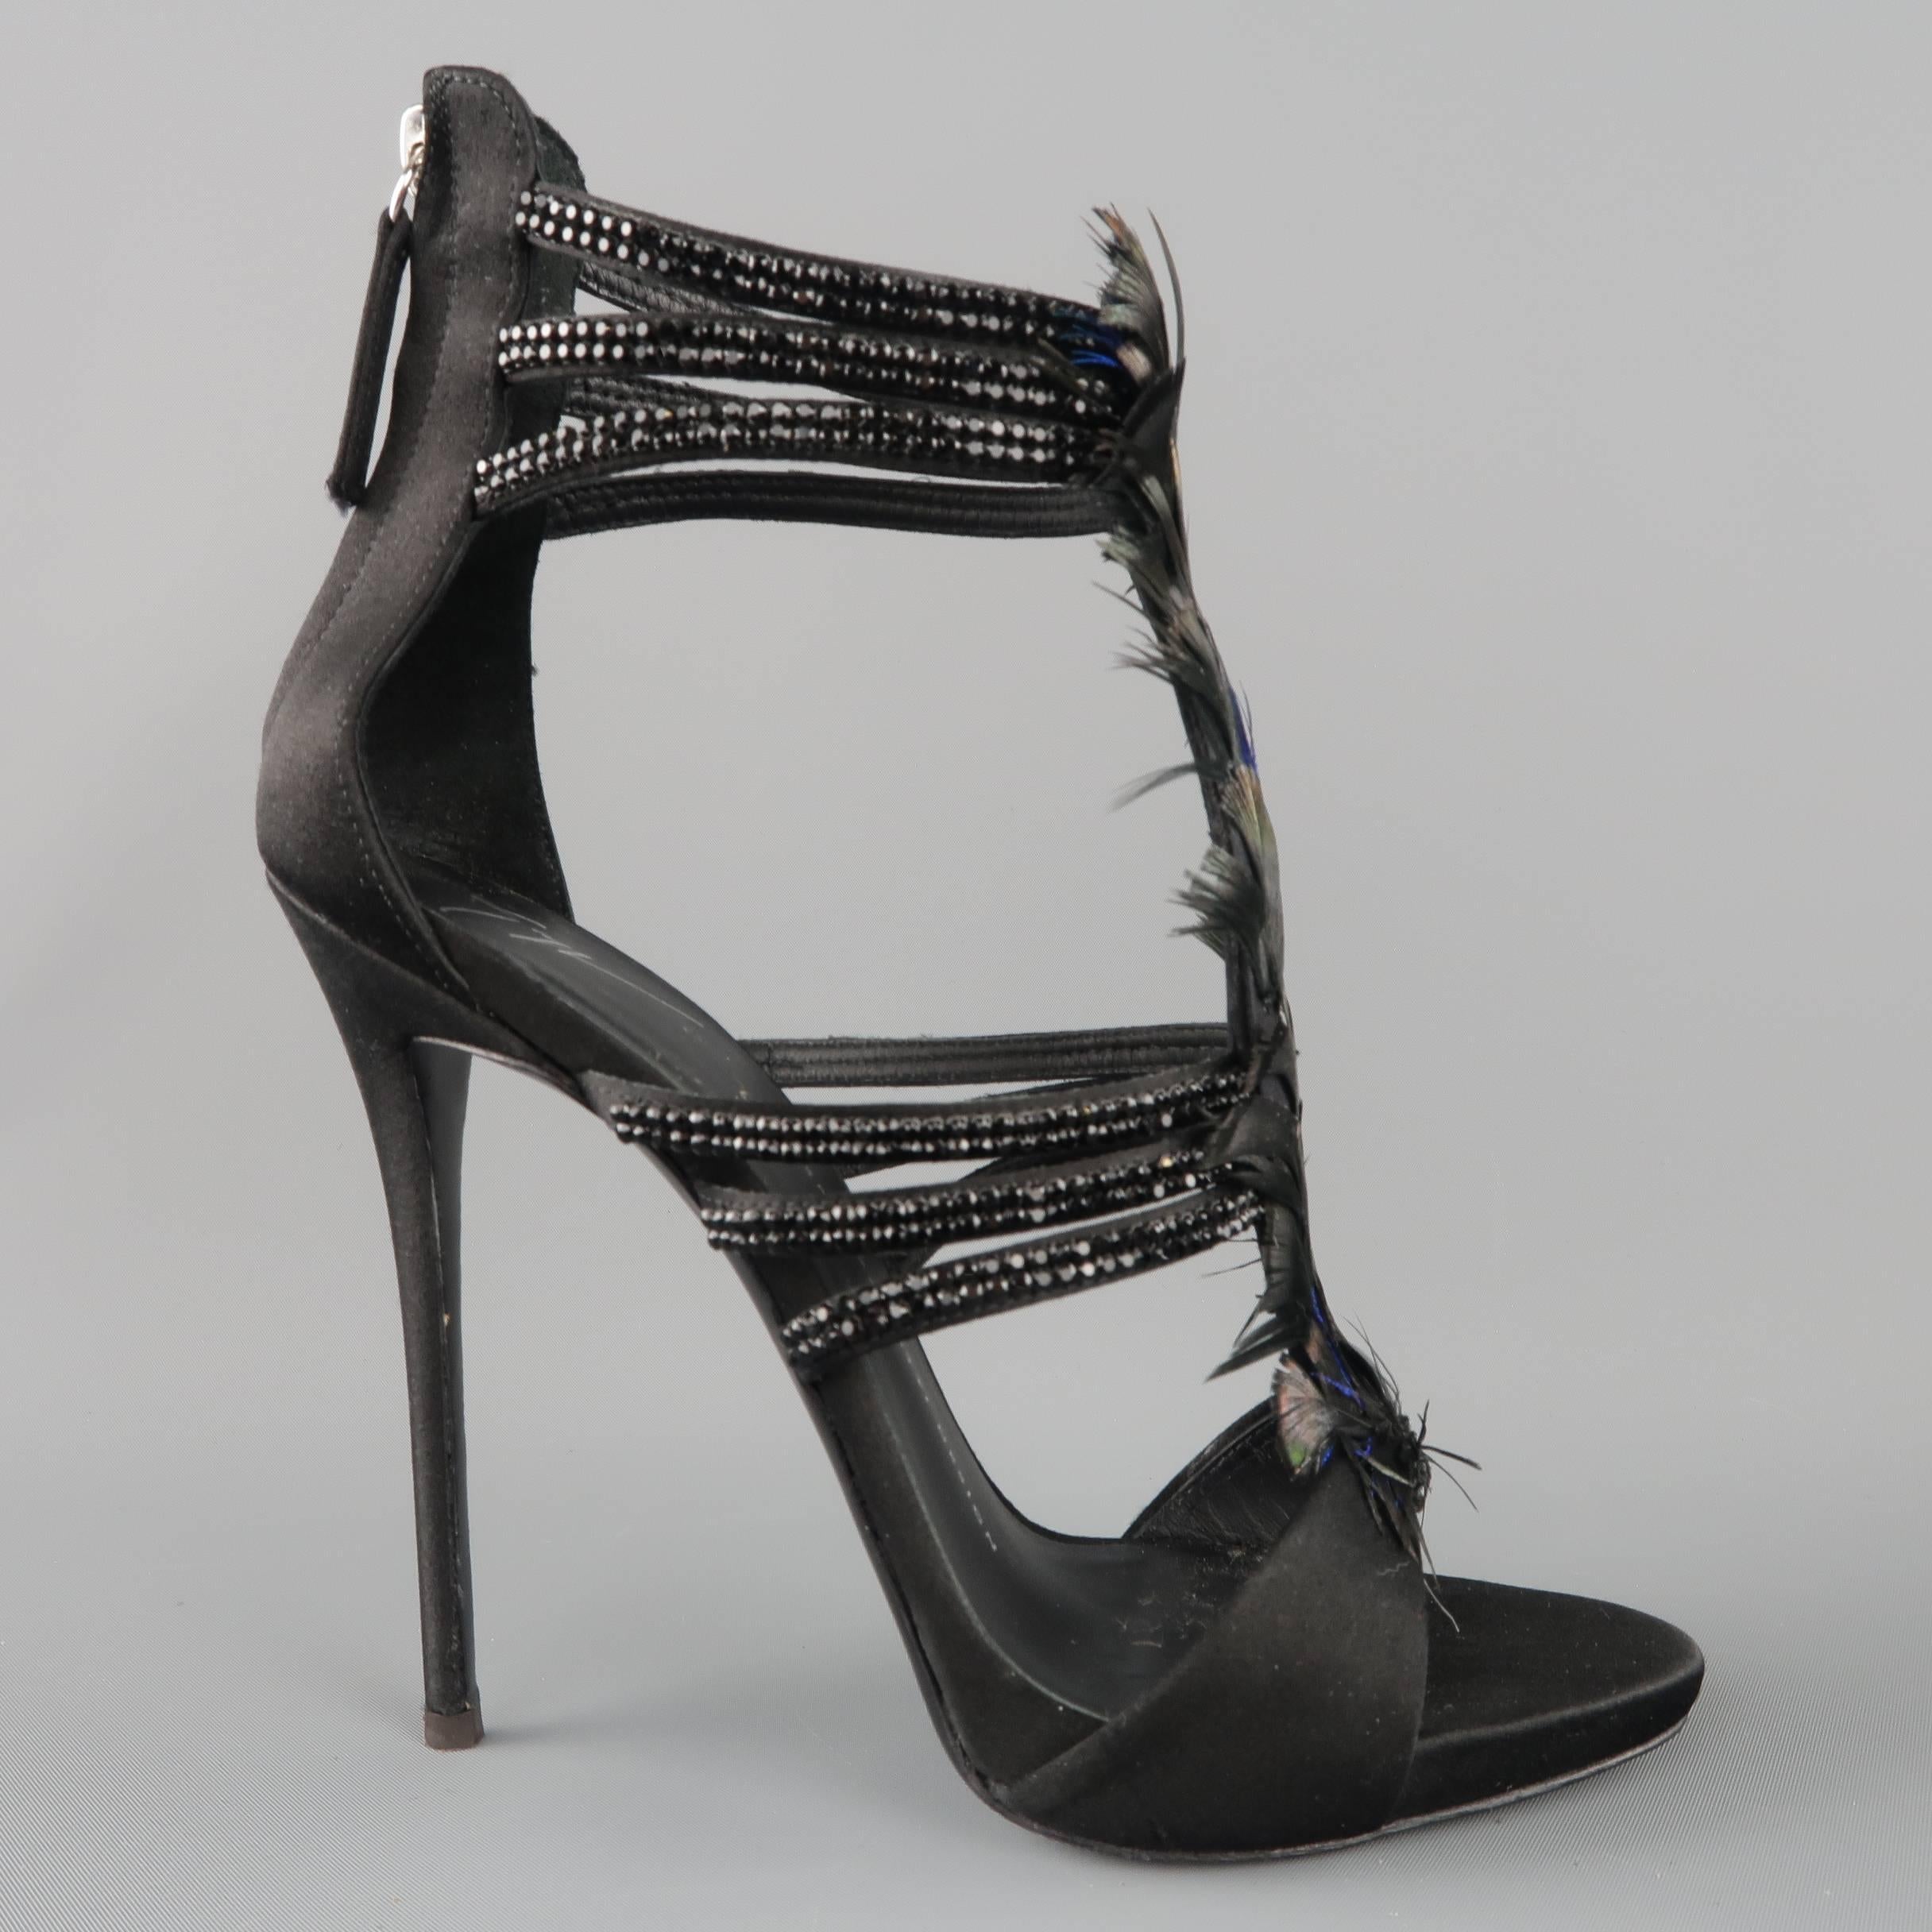 GIUSEPPE ZANOTTI "Coline" sandals come in black silk satin and feature black rhinestone studded straps, covered stiletto heel, and peacock feather embellished T strap front. Made in Italy.
 
Excellent Pre-Owned Condition.
Marked: IT 38.5
